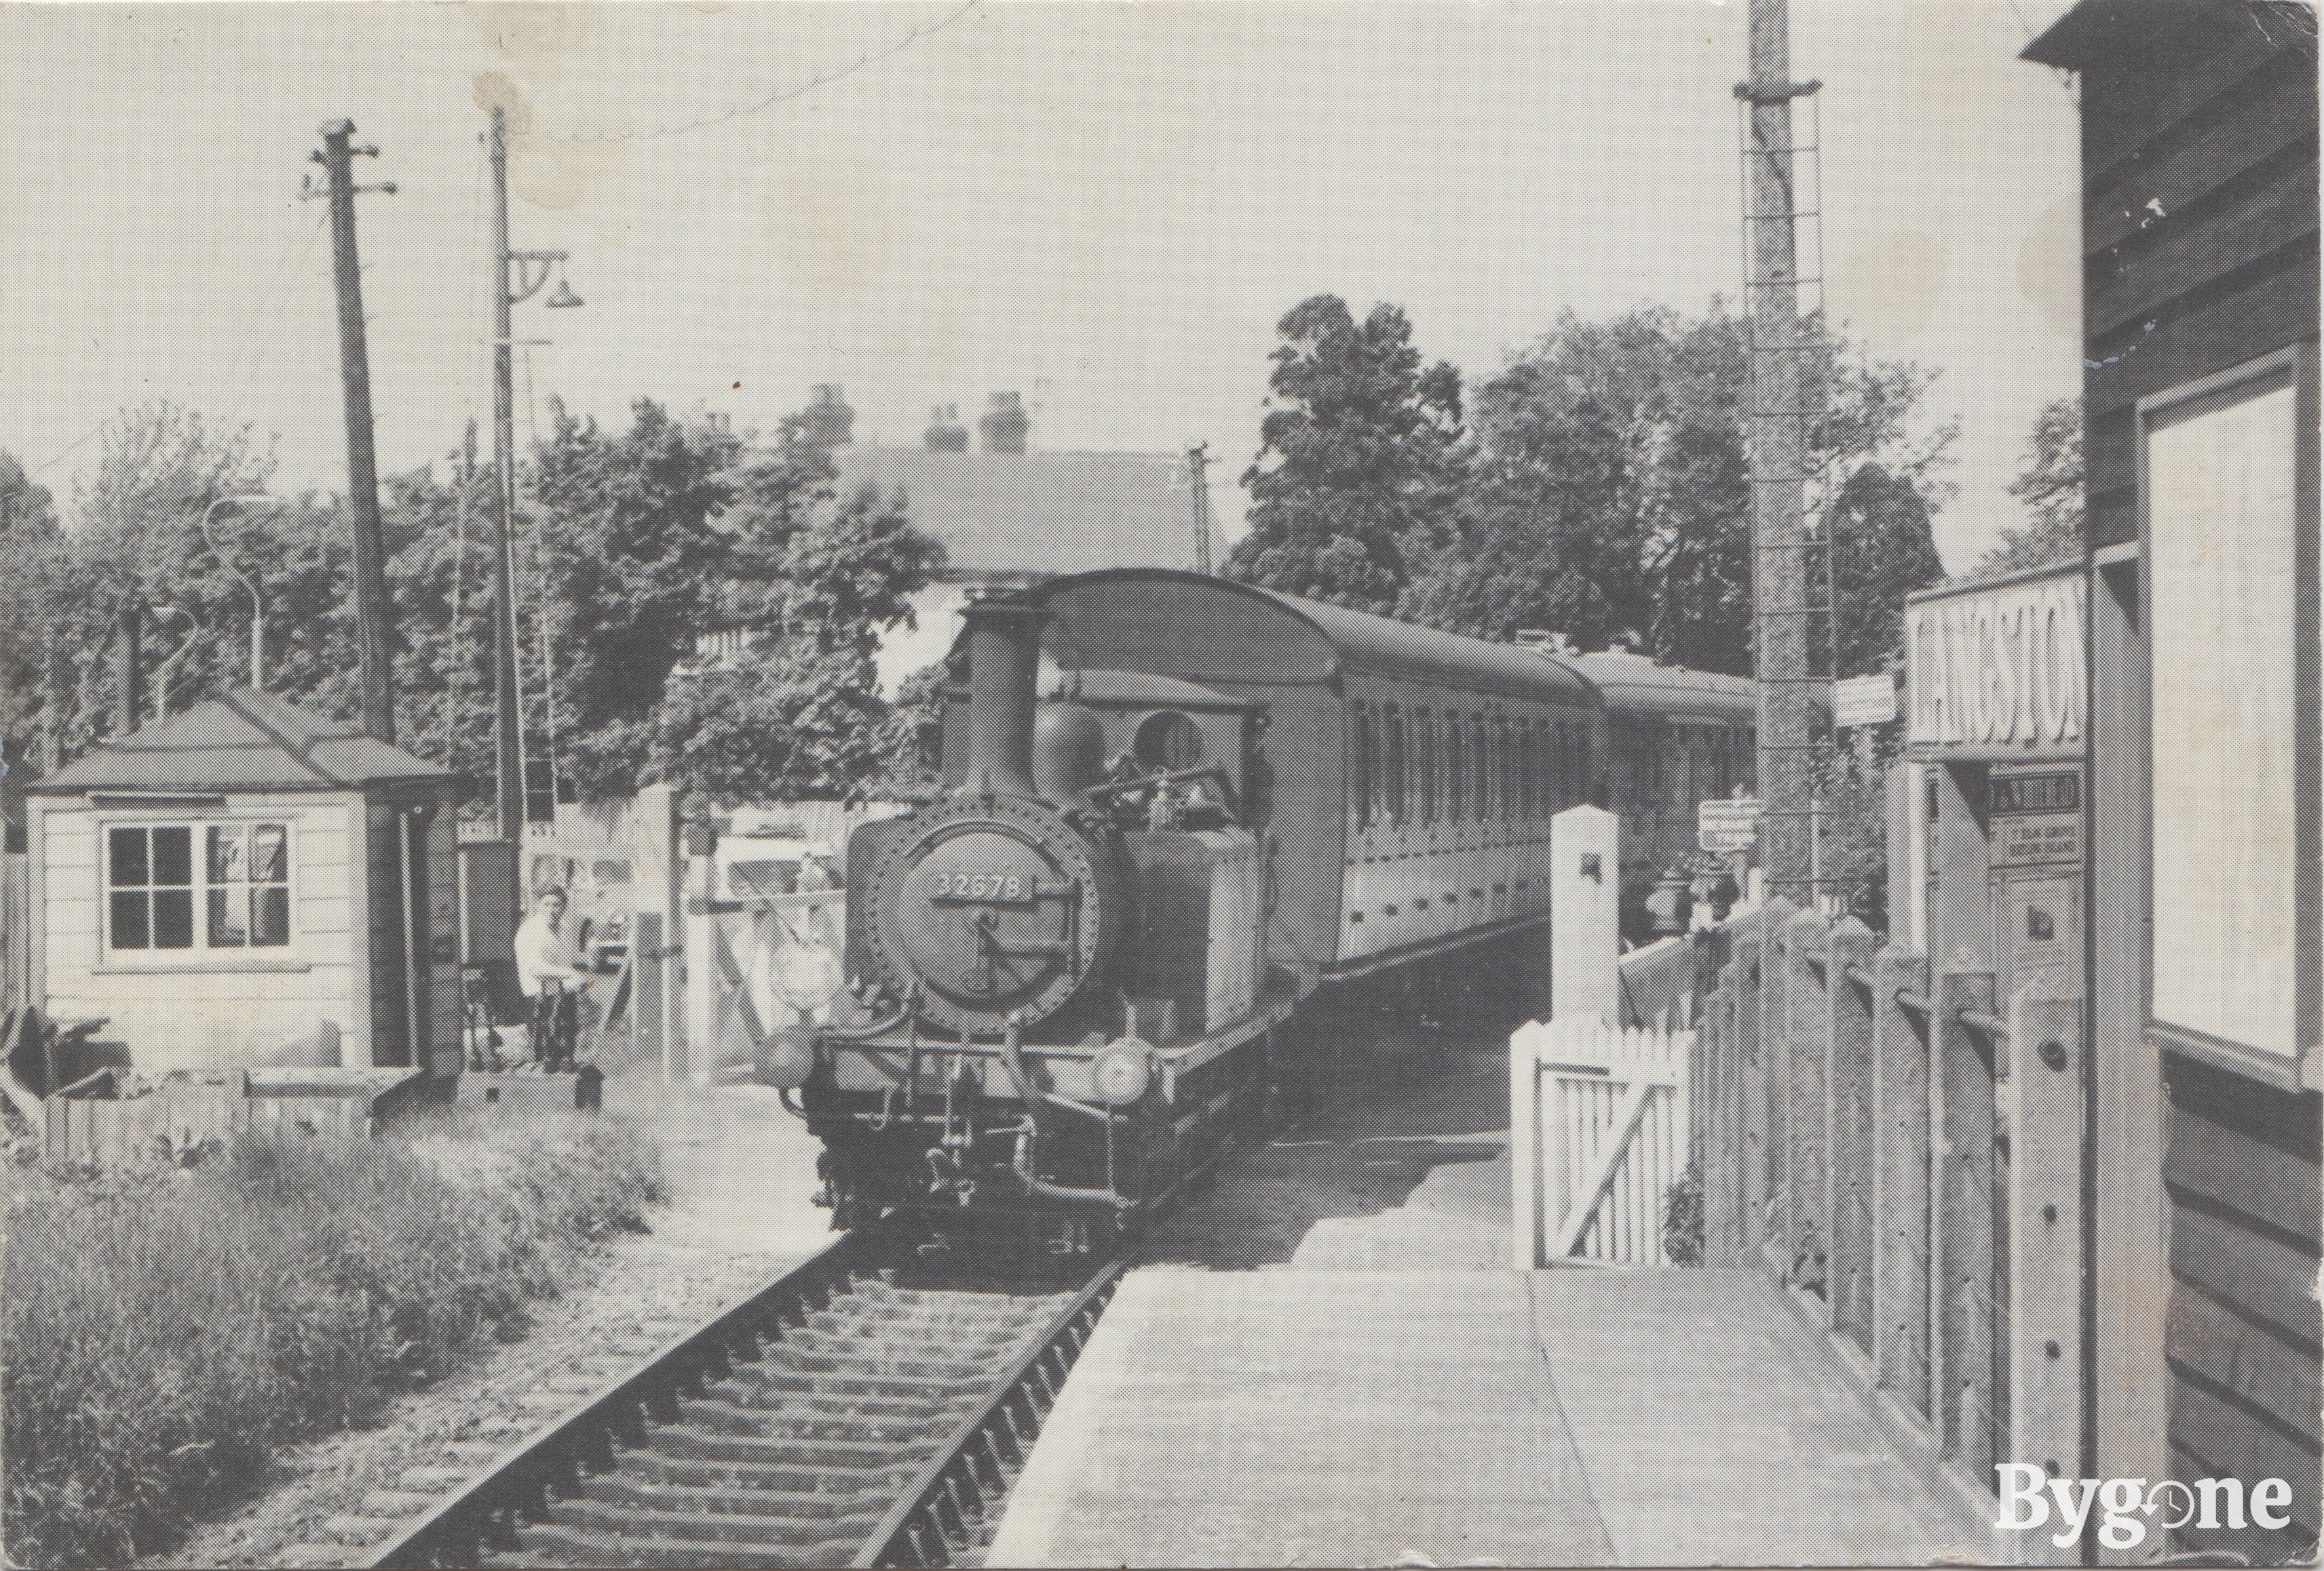 The Hayling Billy arriving at Langston Station, 2 June 1963